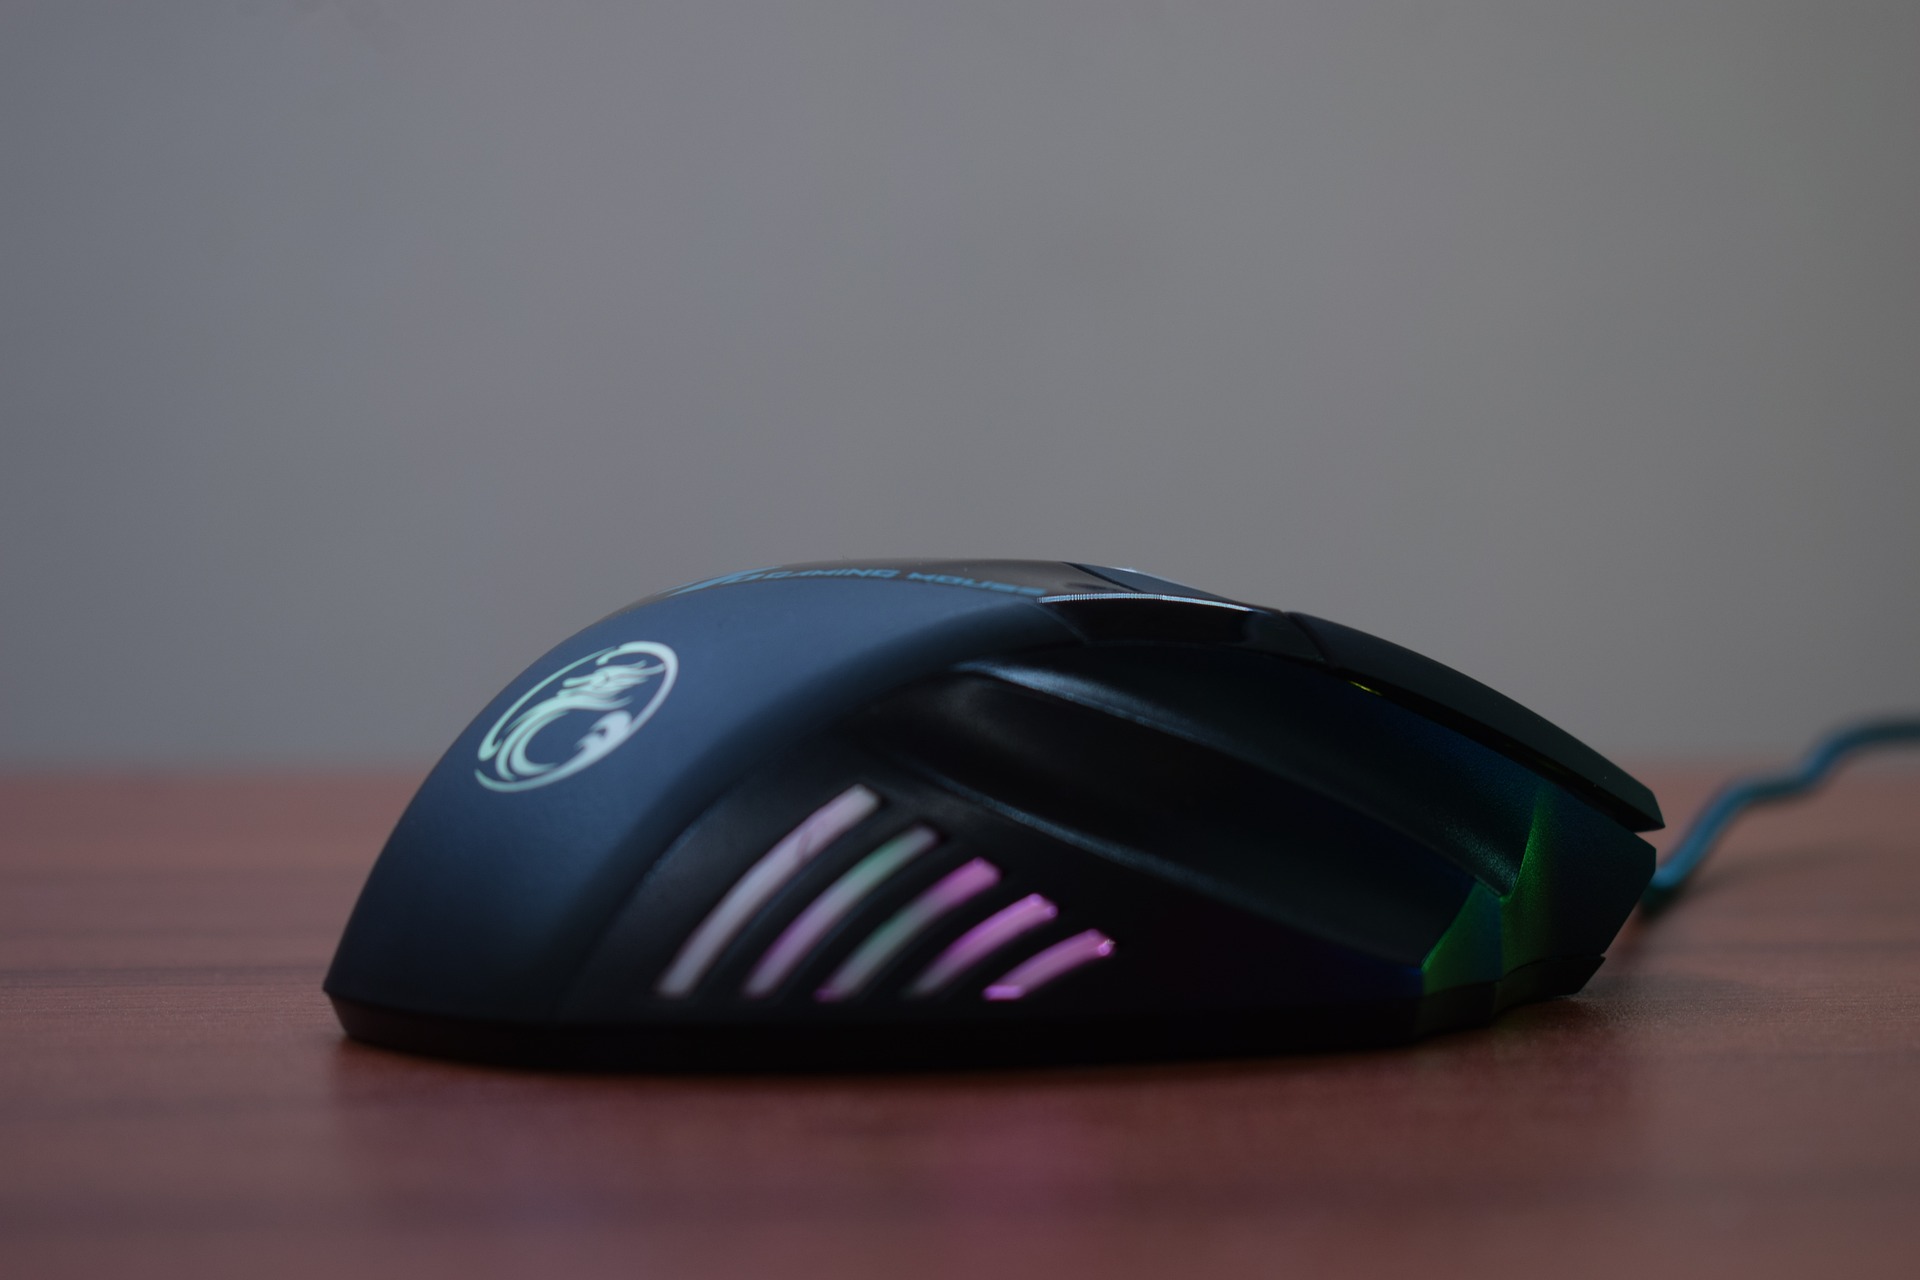 Roccat Gaming Mouse